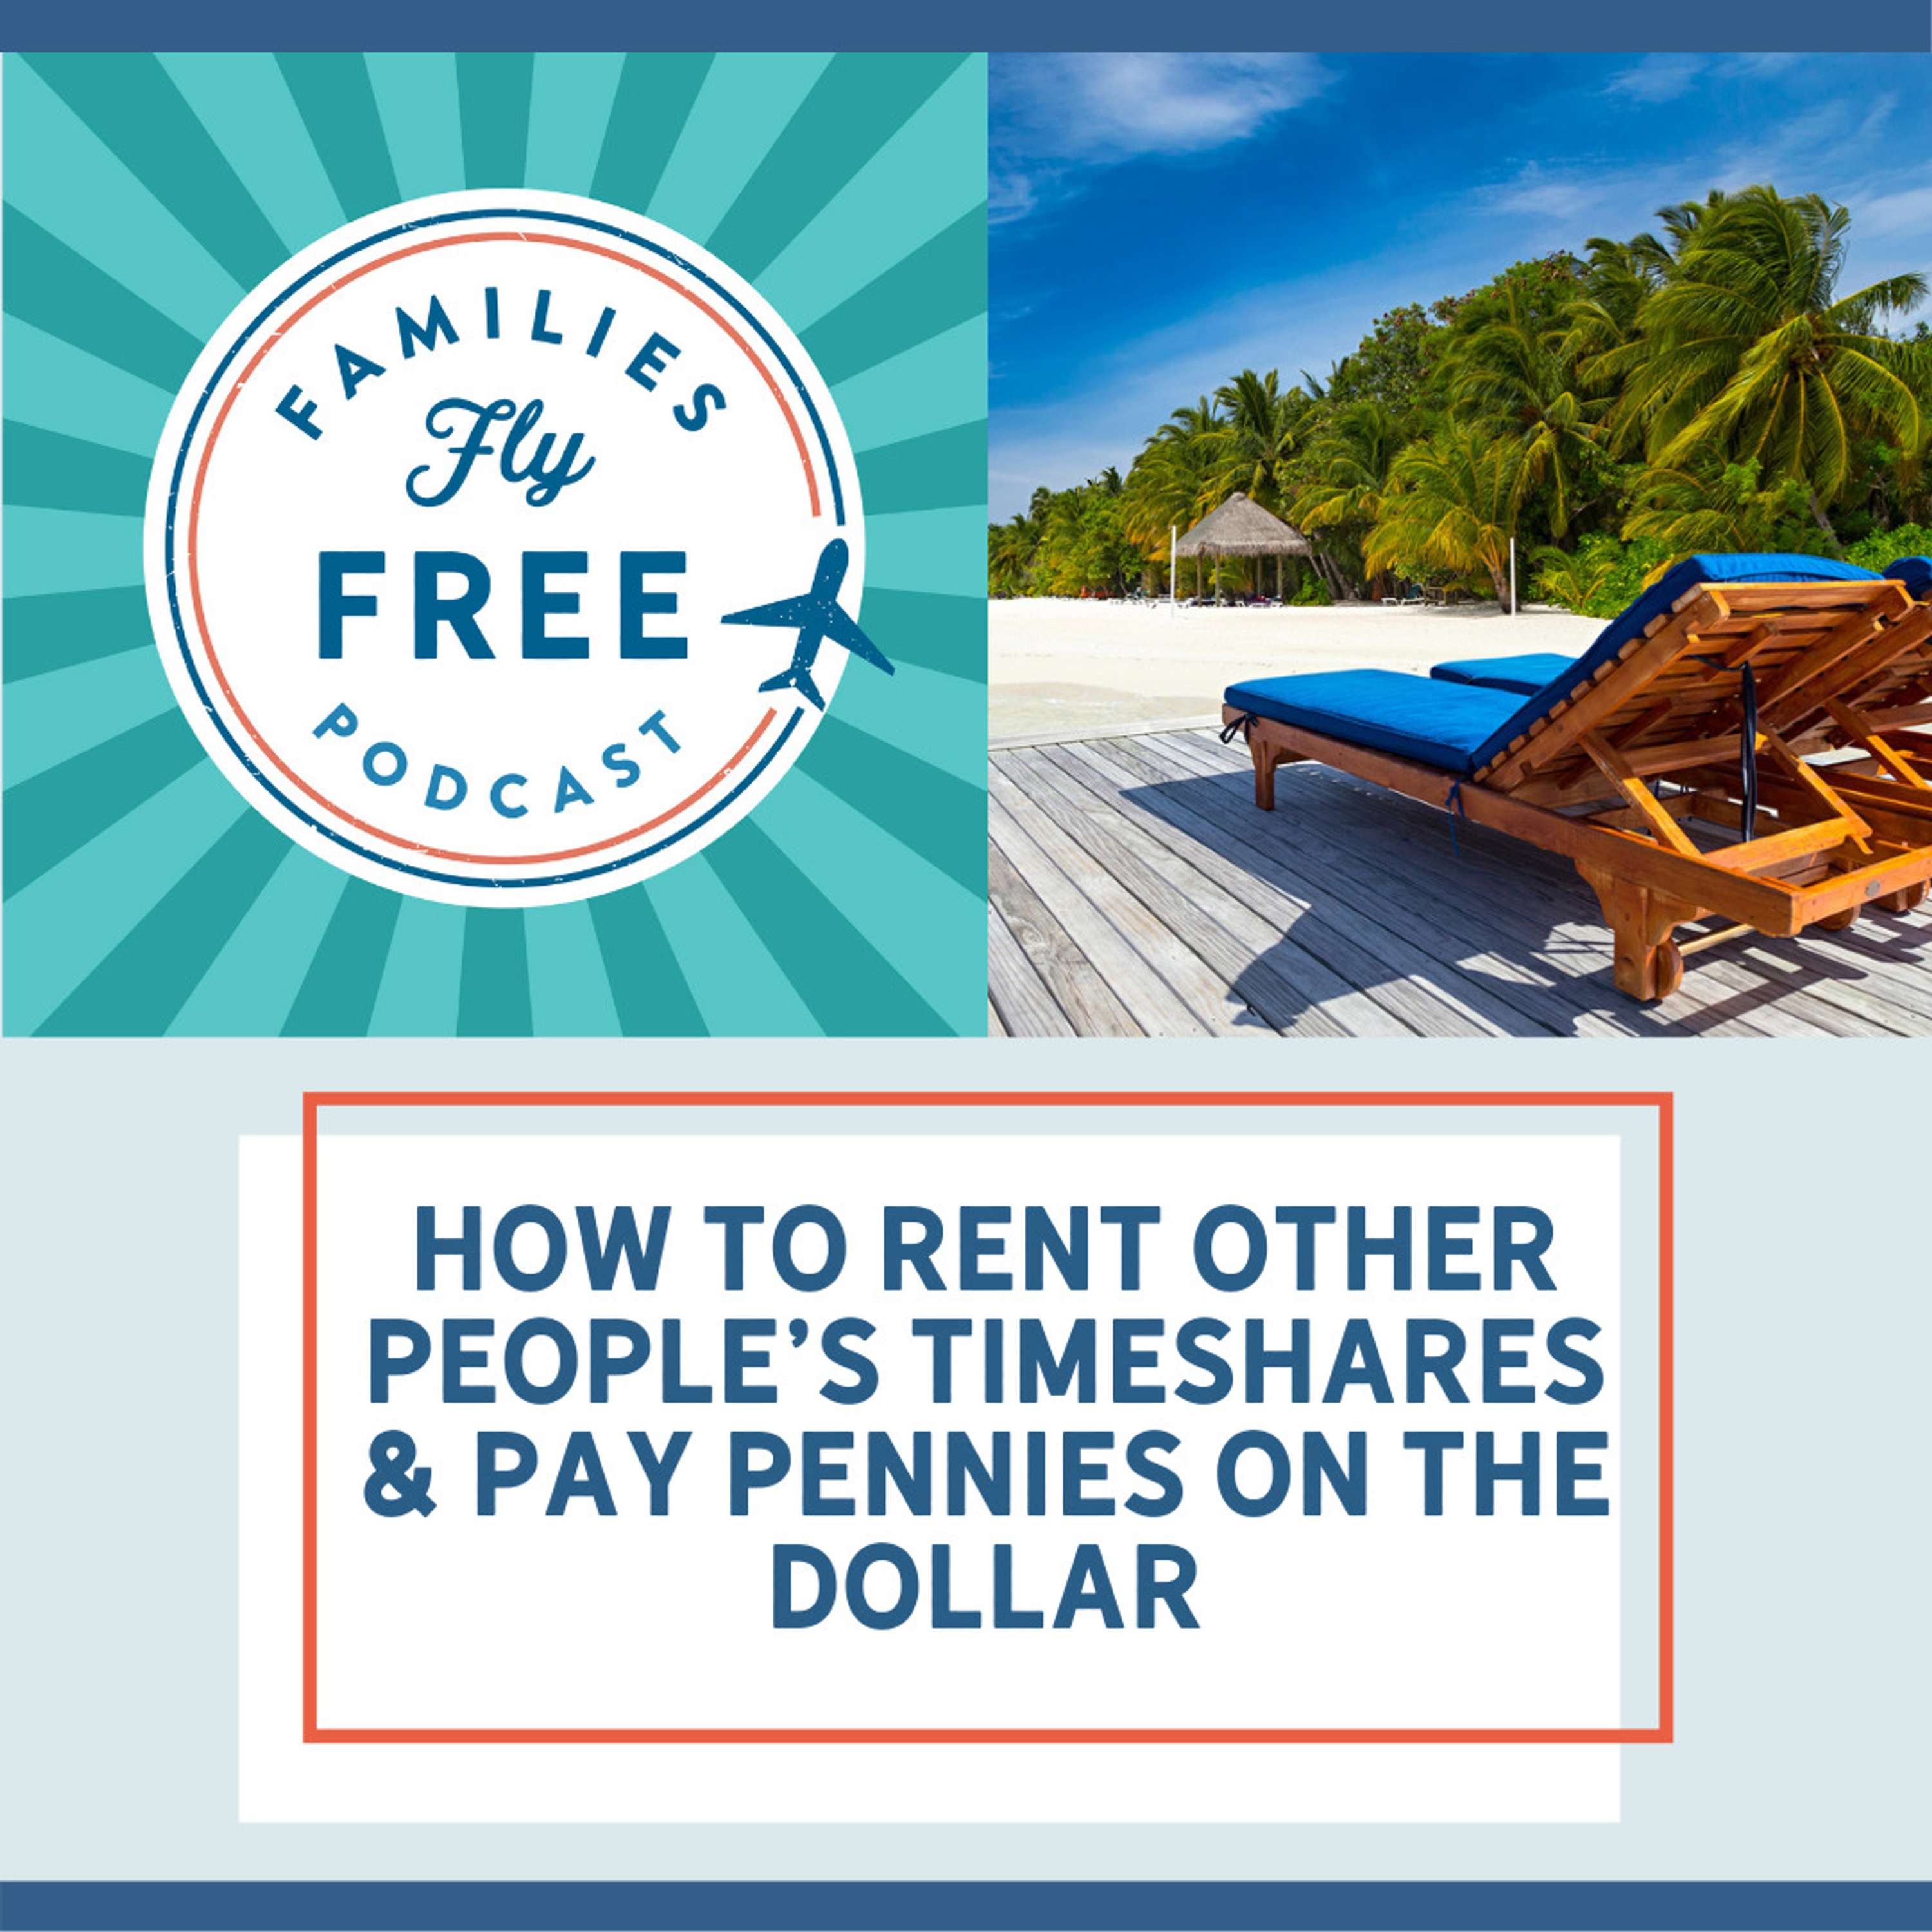 57 | Top Accommodations for Pennies on the Dollar: Renting Other People’s Timeshares